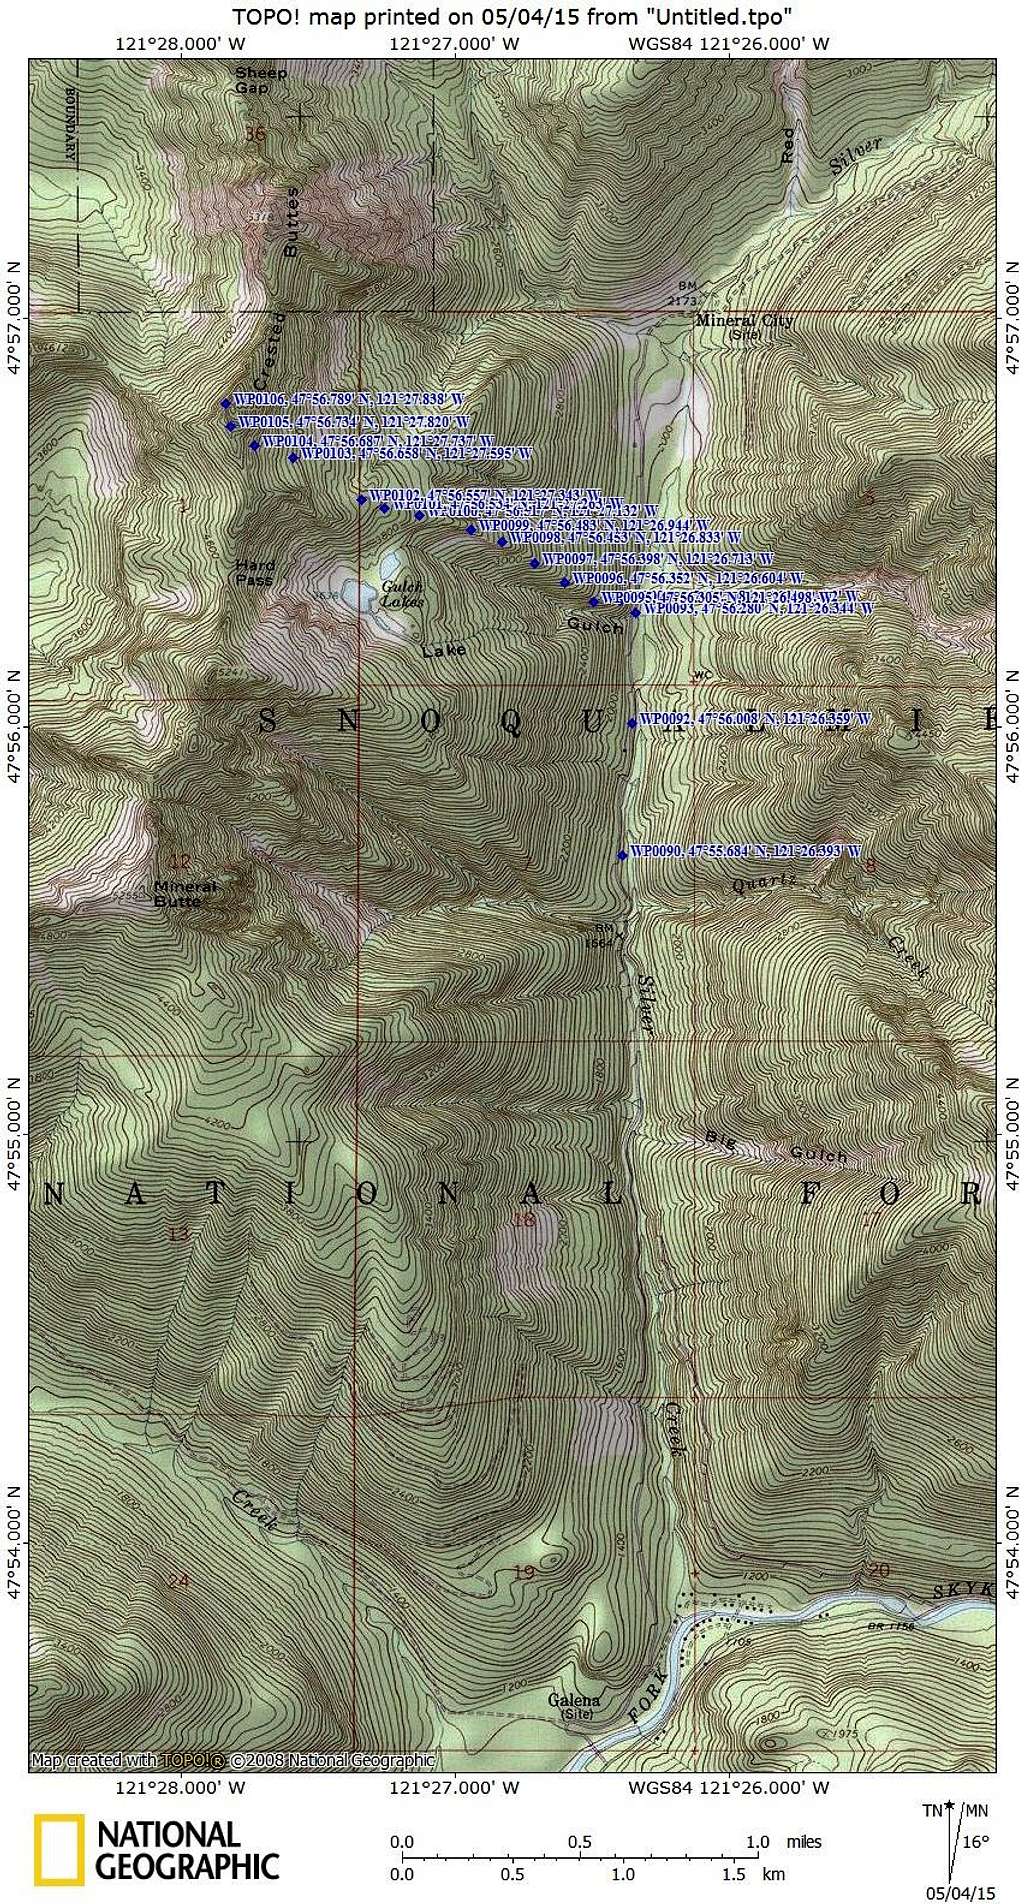 South Crested Butte route map